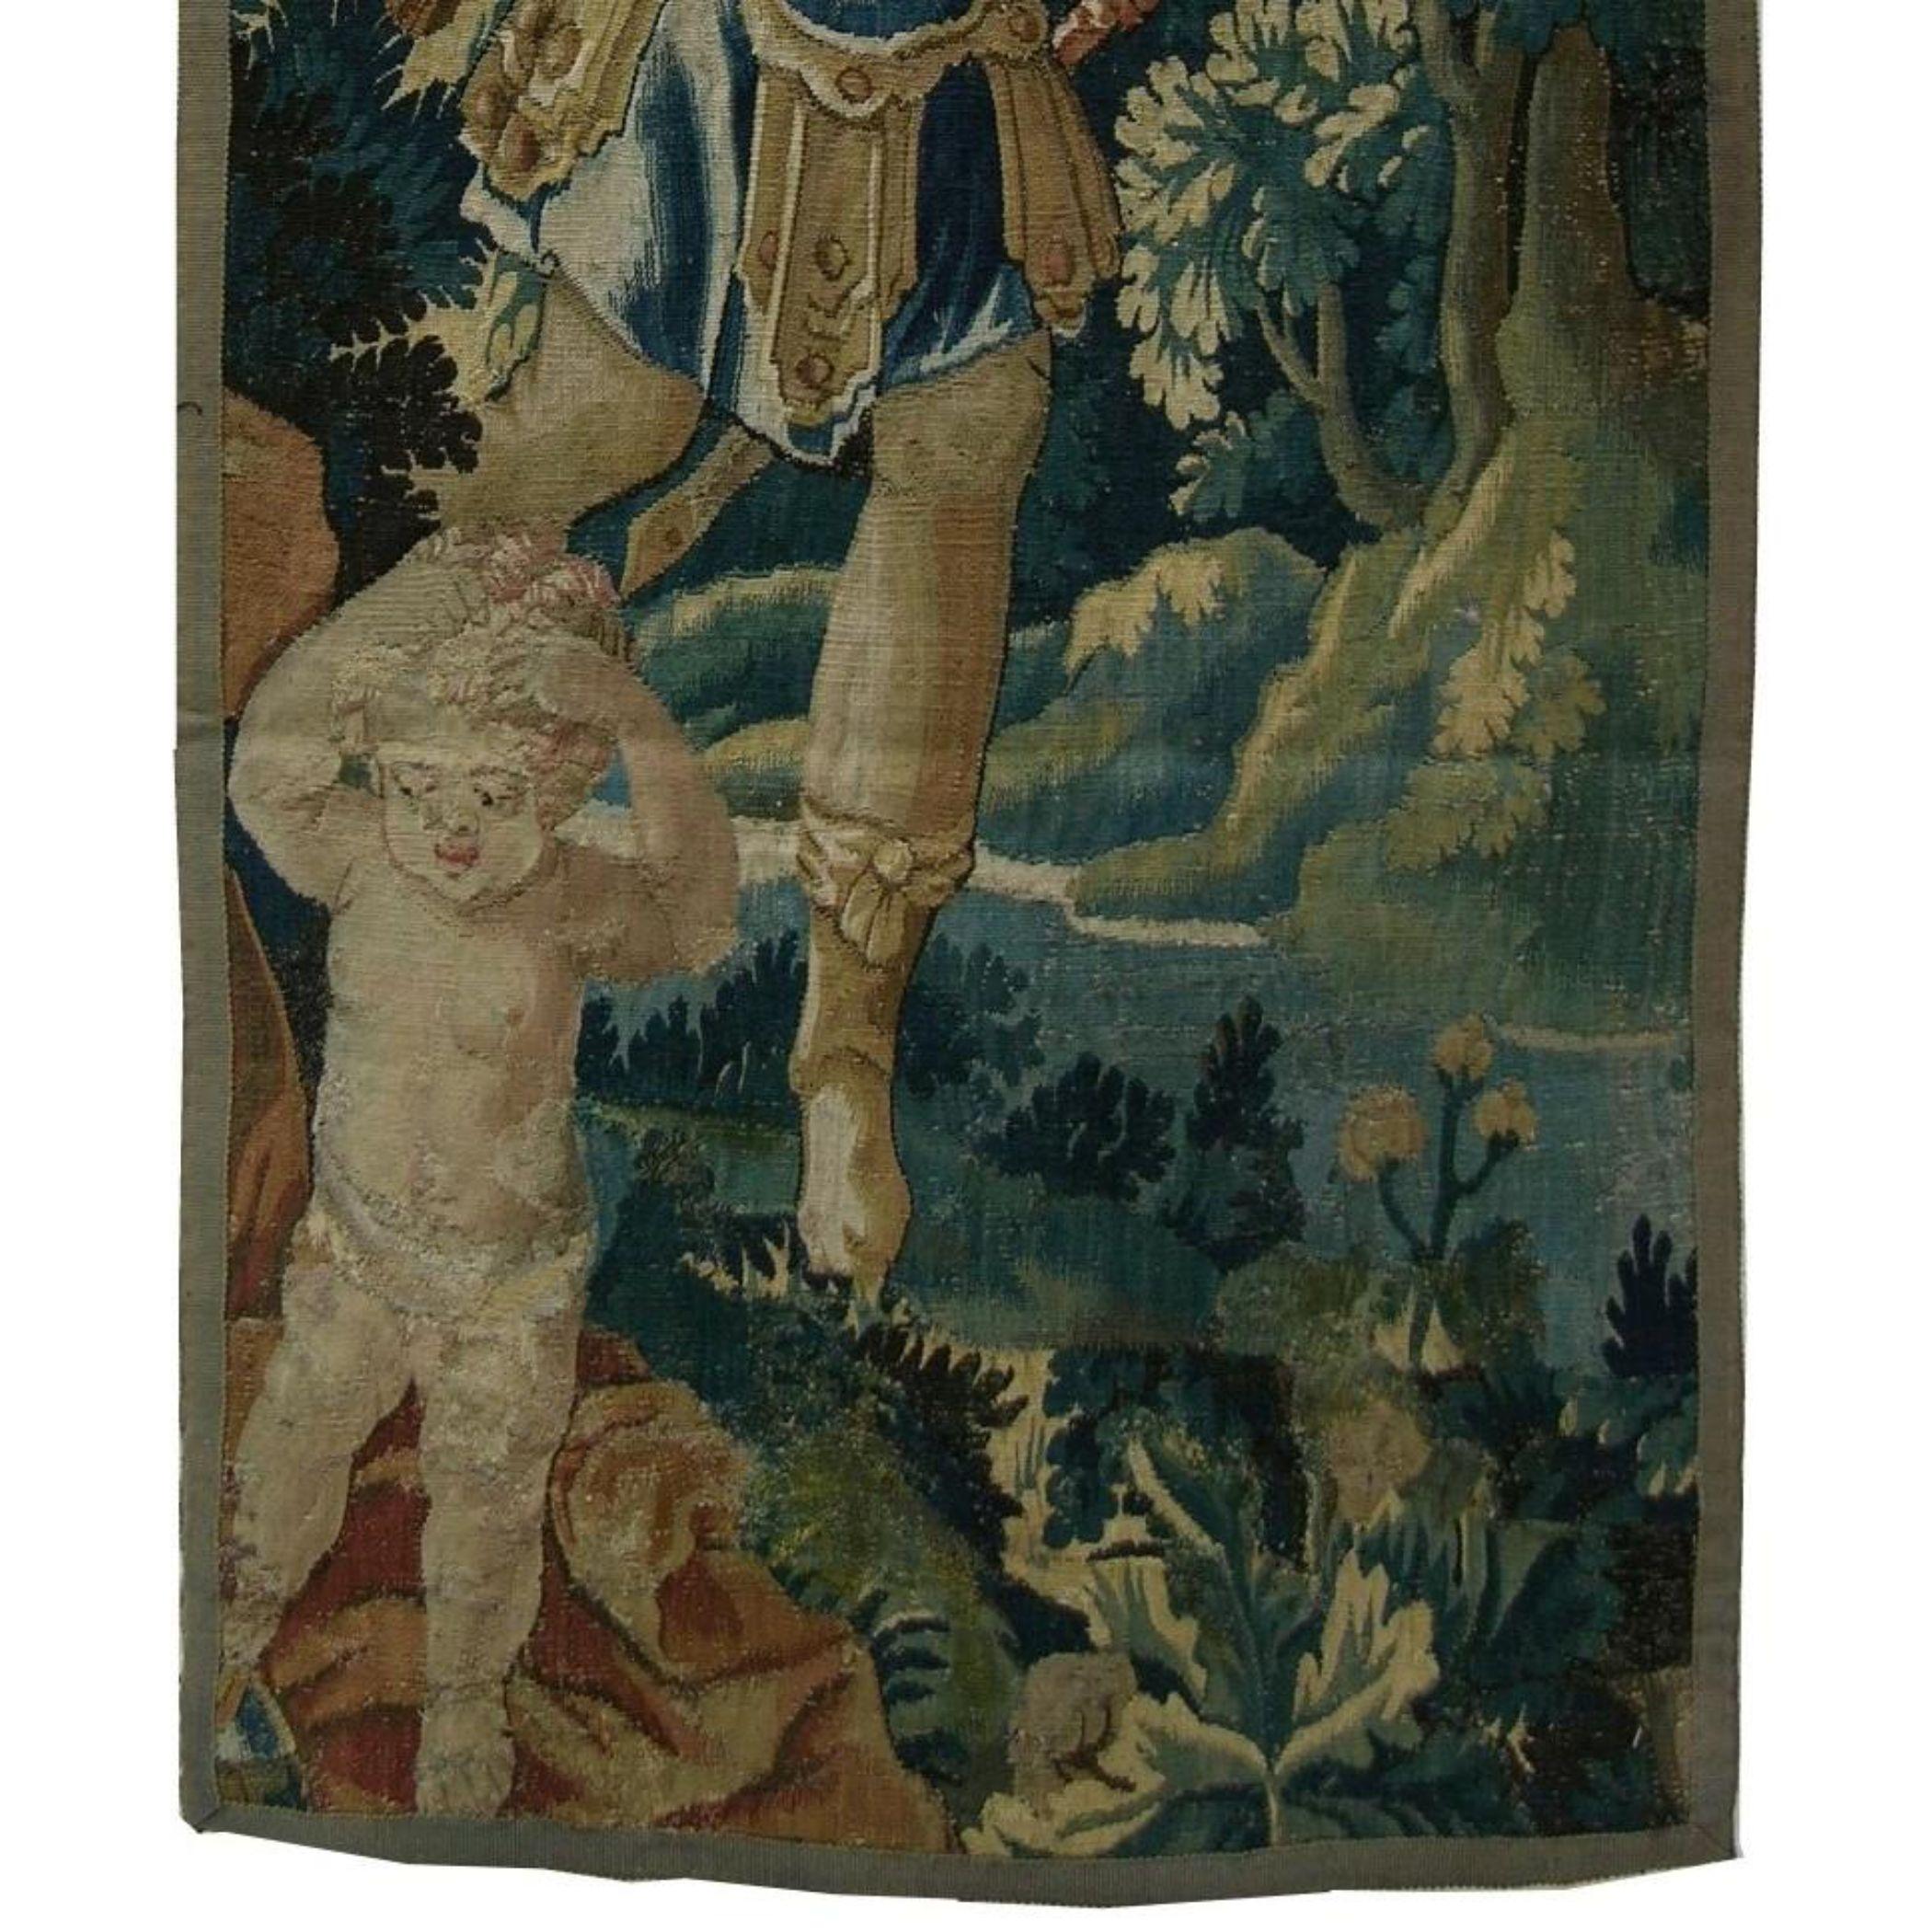 Unknown Antique 17th Century Flemish Tapestry 6'7